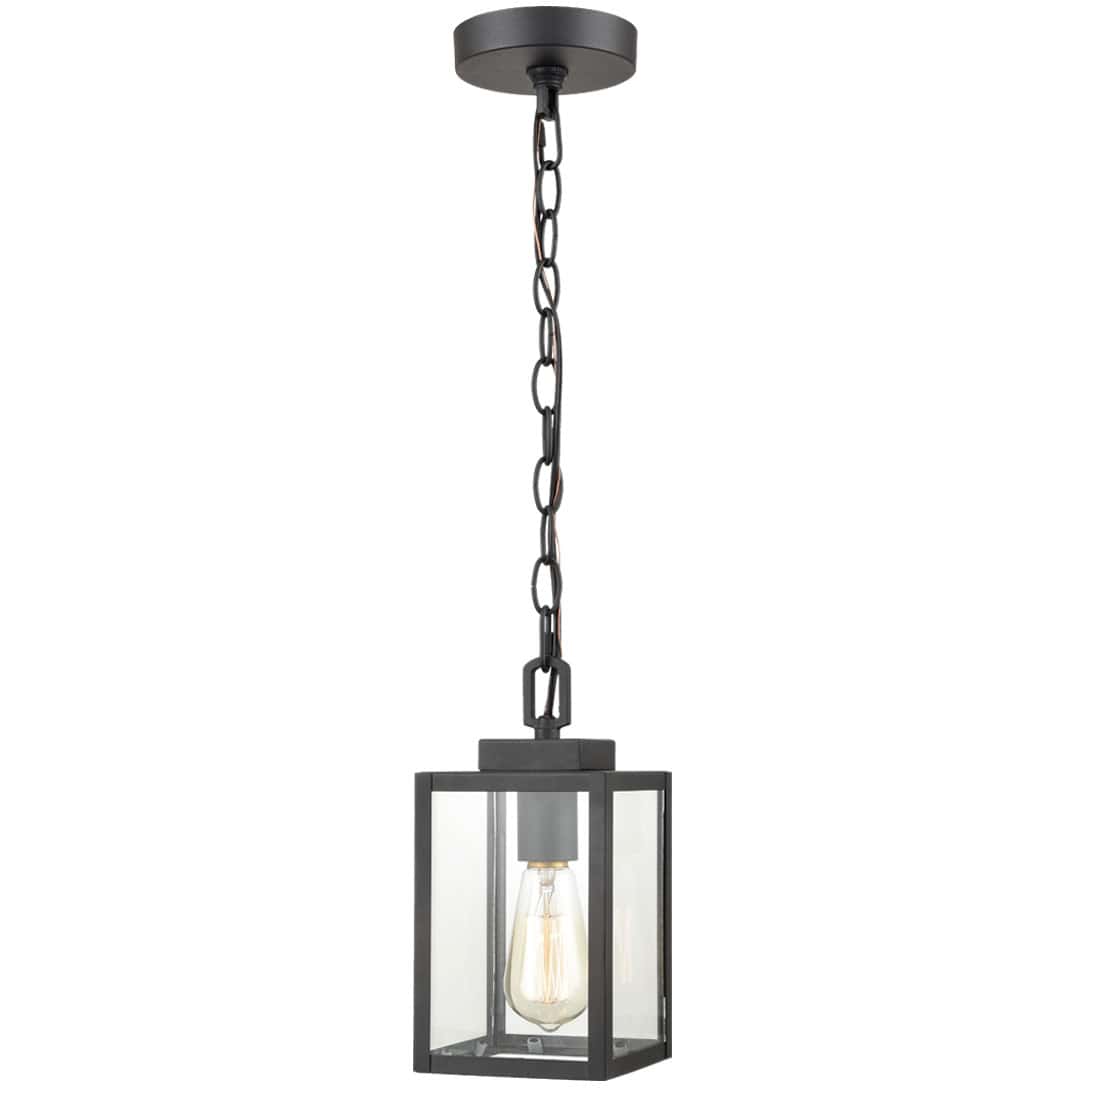 Beionxii 1-Light Exterior Hanging Lantern in Oil Rubbed Bronze Finish with Water Ripple Glass Shade Outdoor Pendant Light Pendant Chain Adjustable 